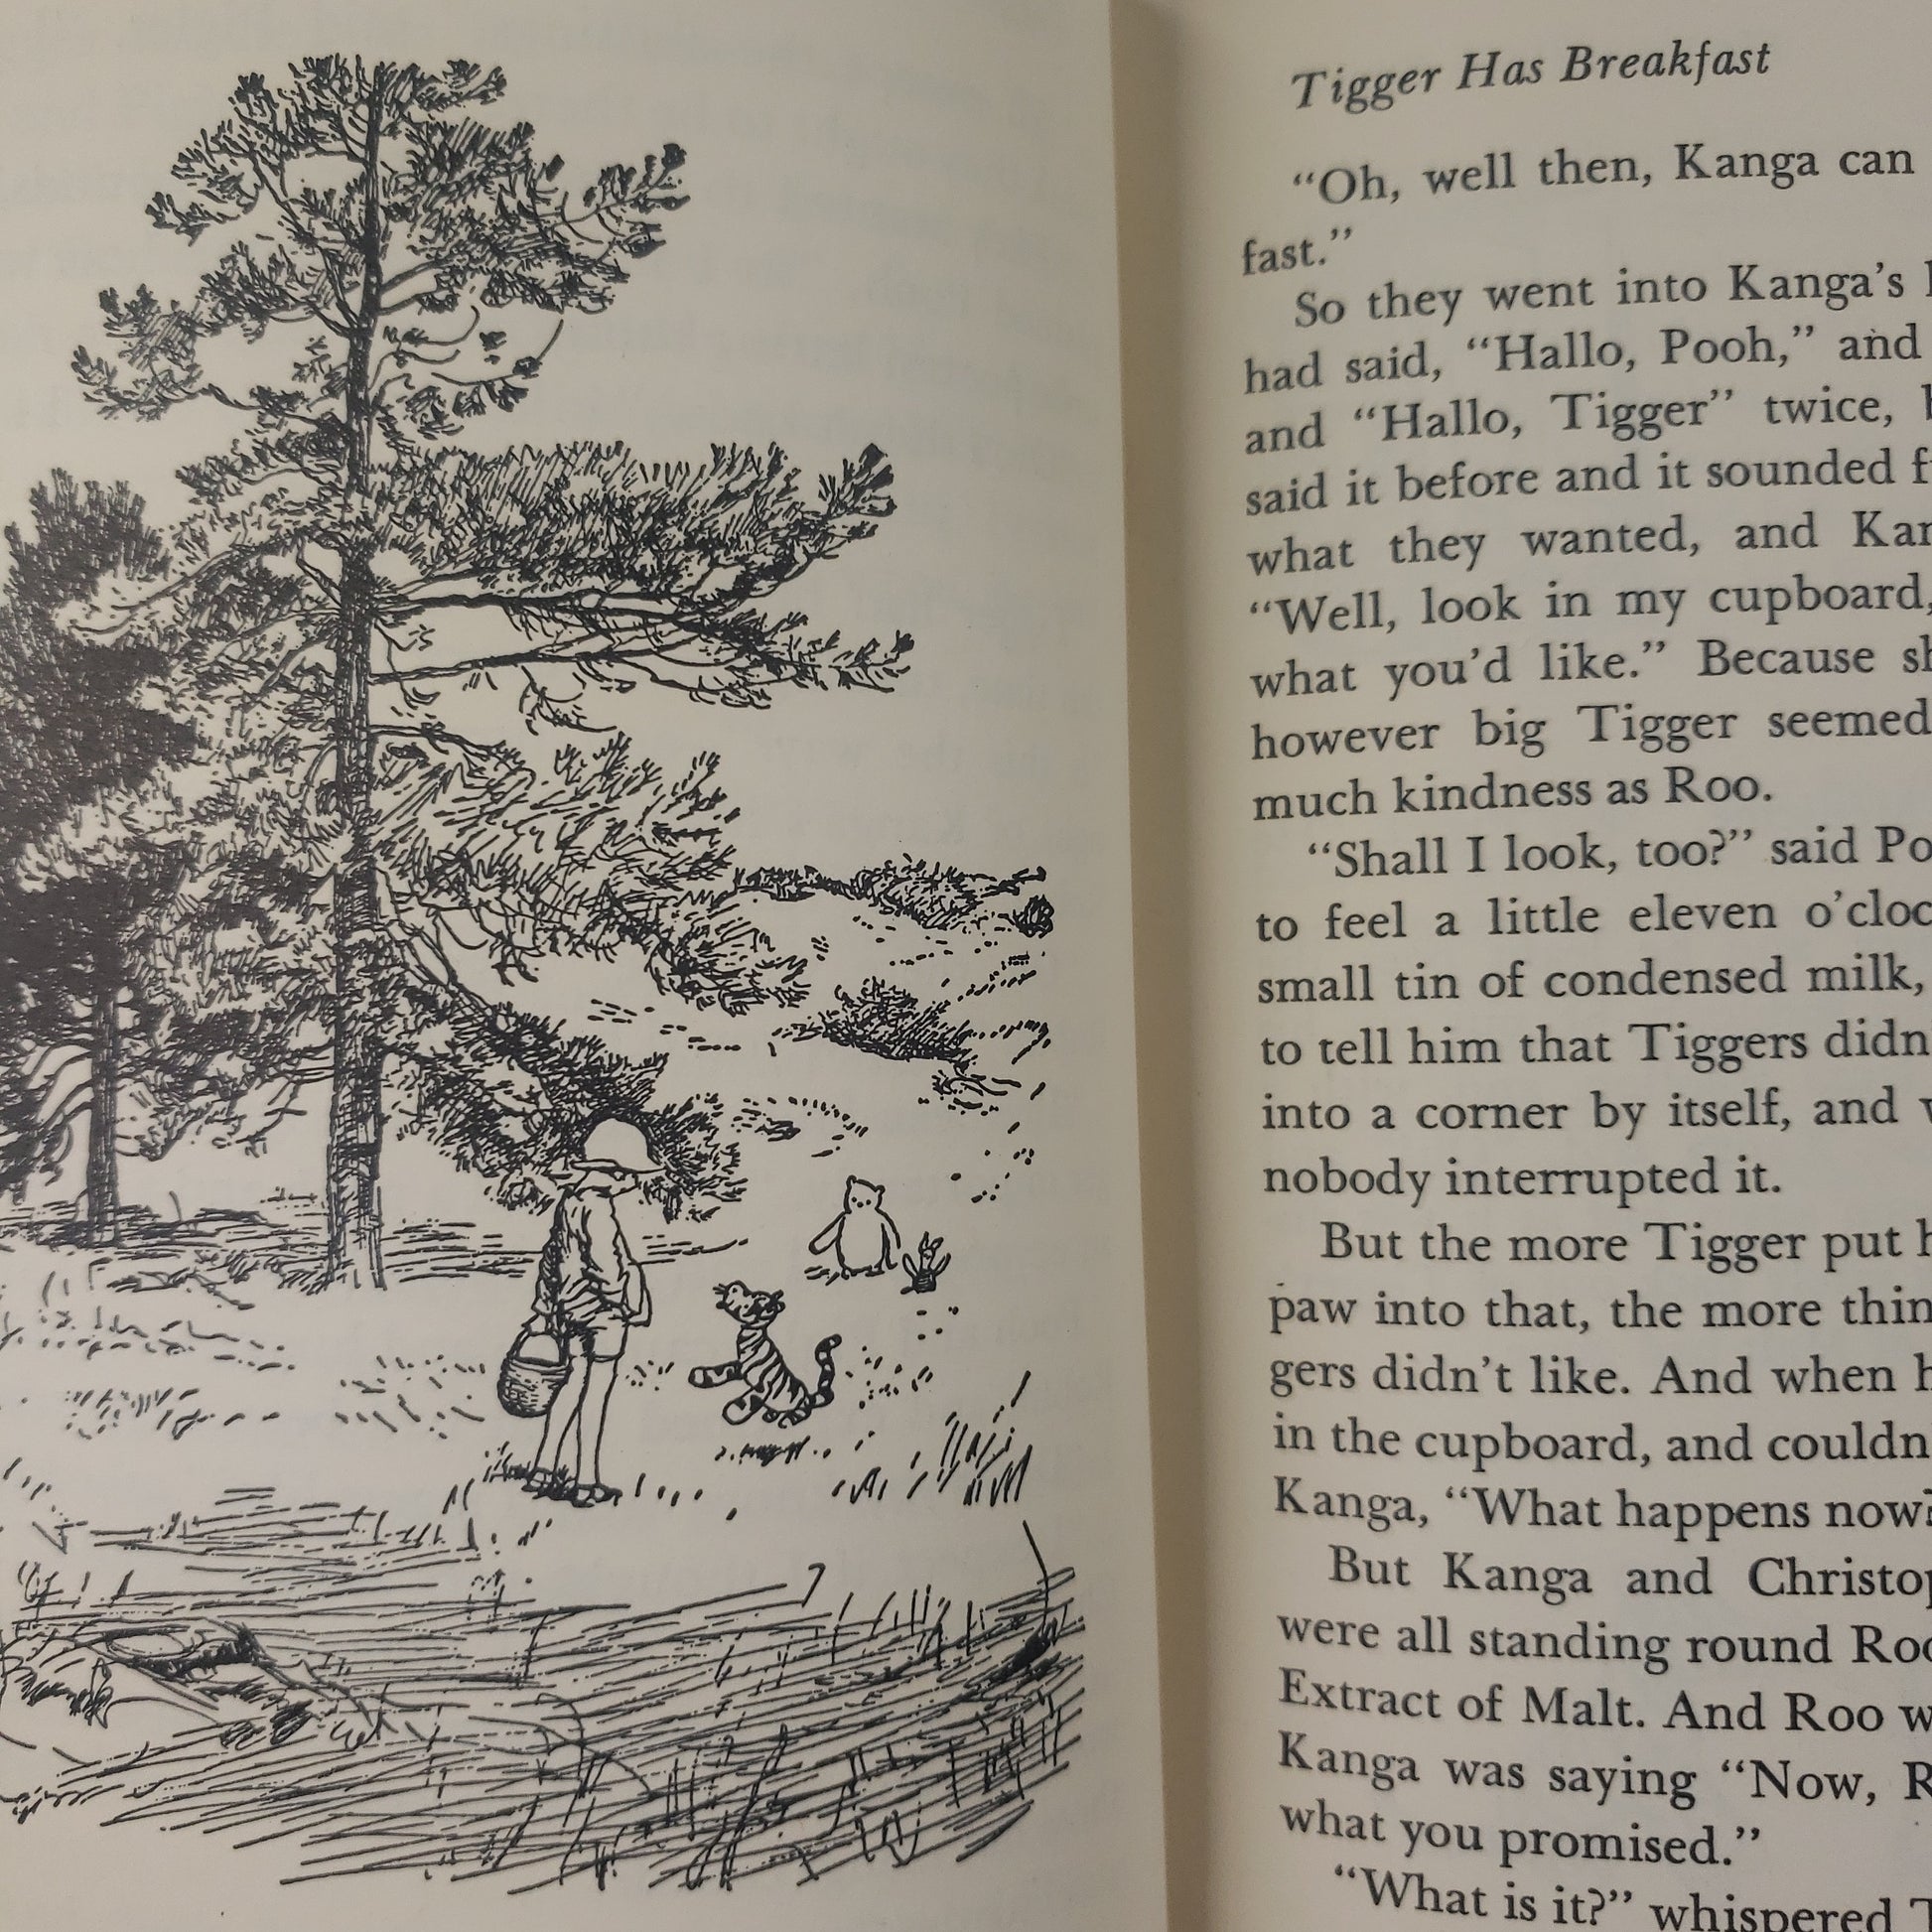 1961 The House At Pooh Corner-Red Barn Collections